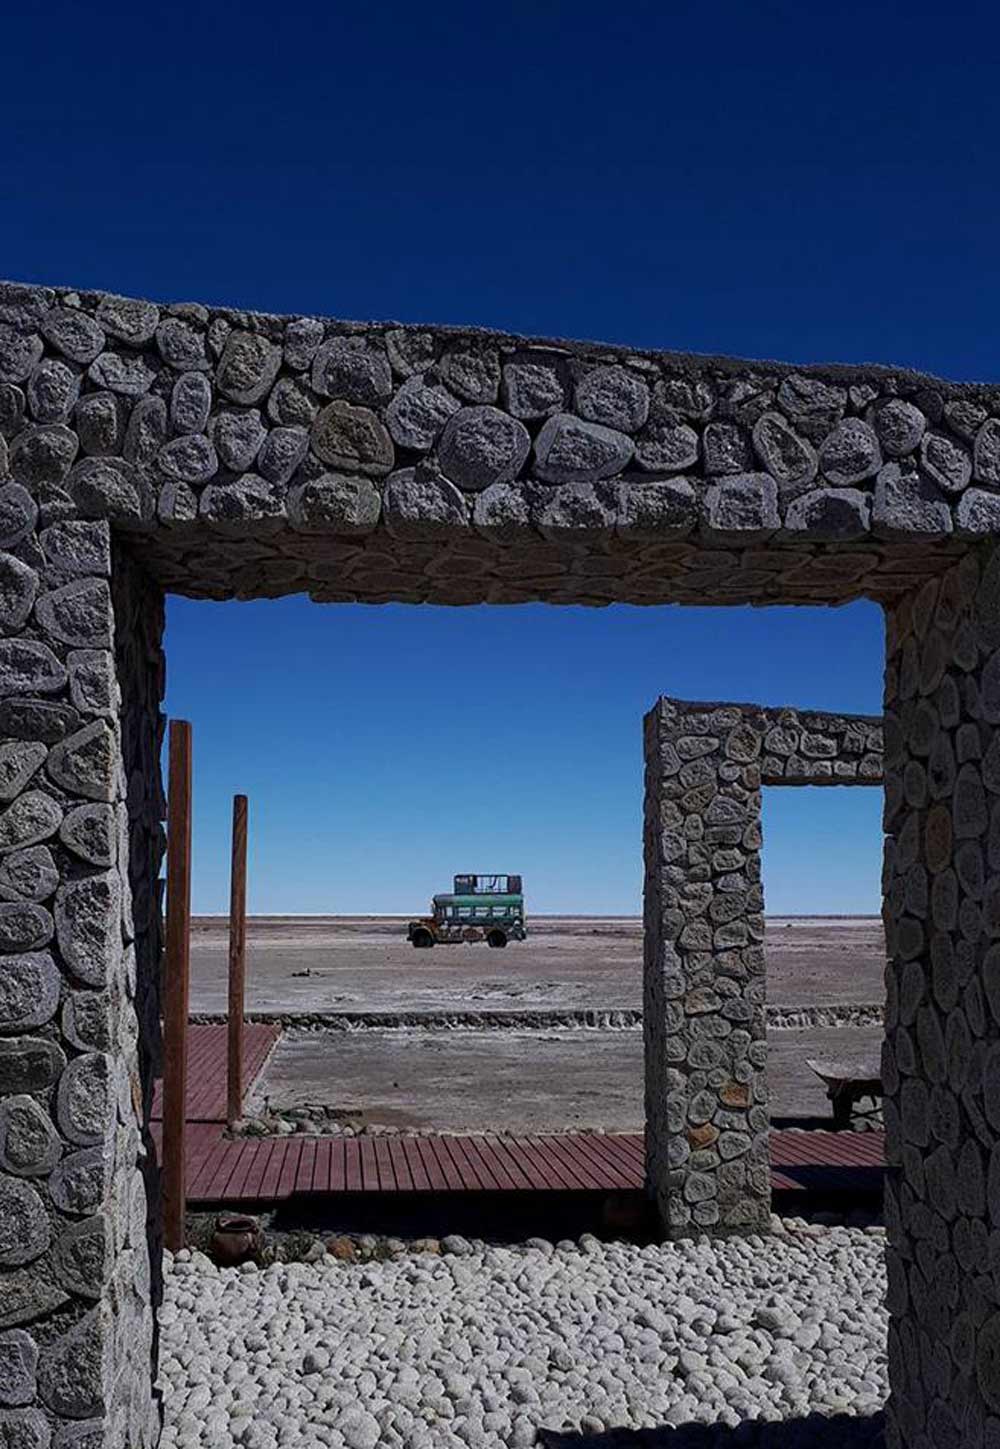 Bolivian bus through Archway by Anthony Pulleine